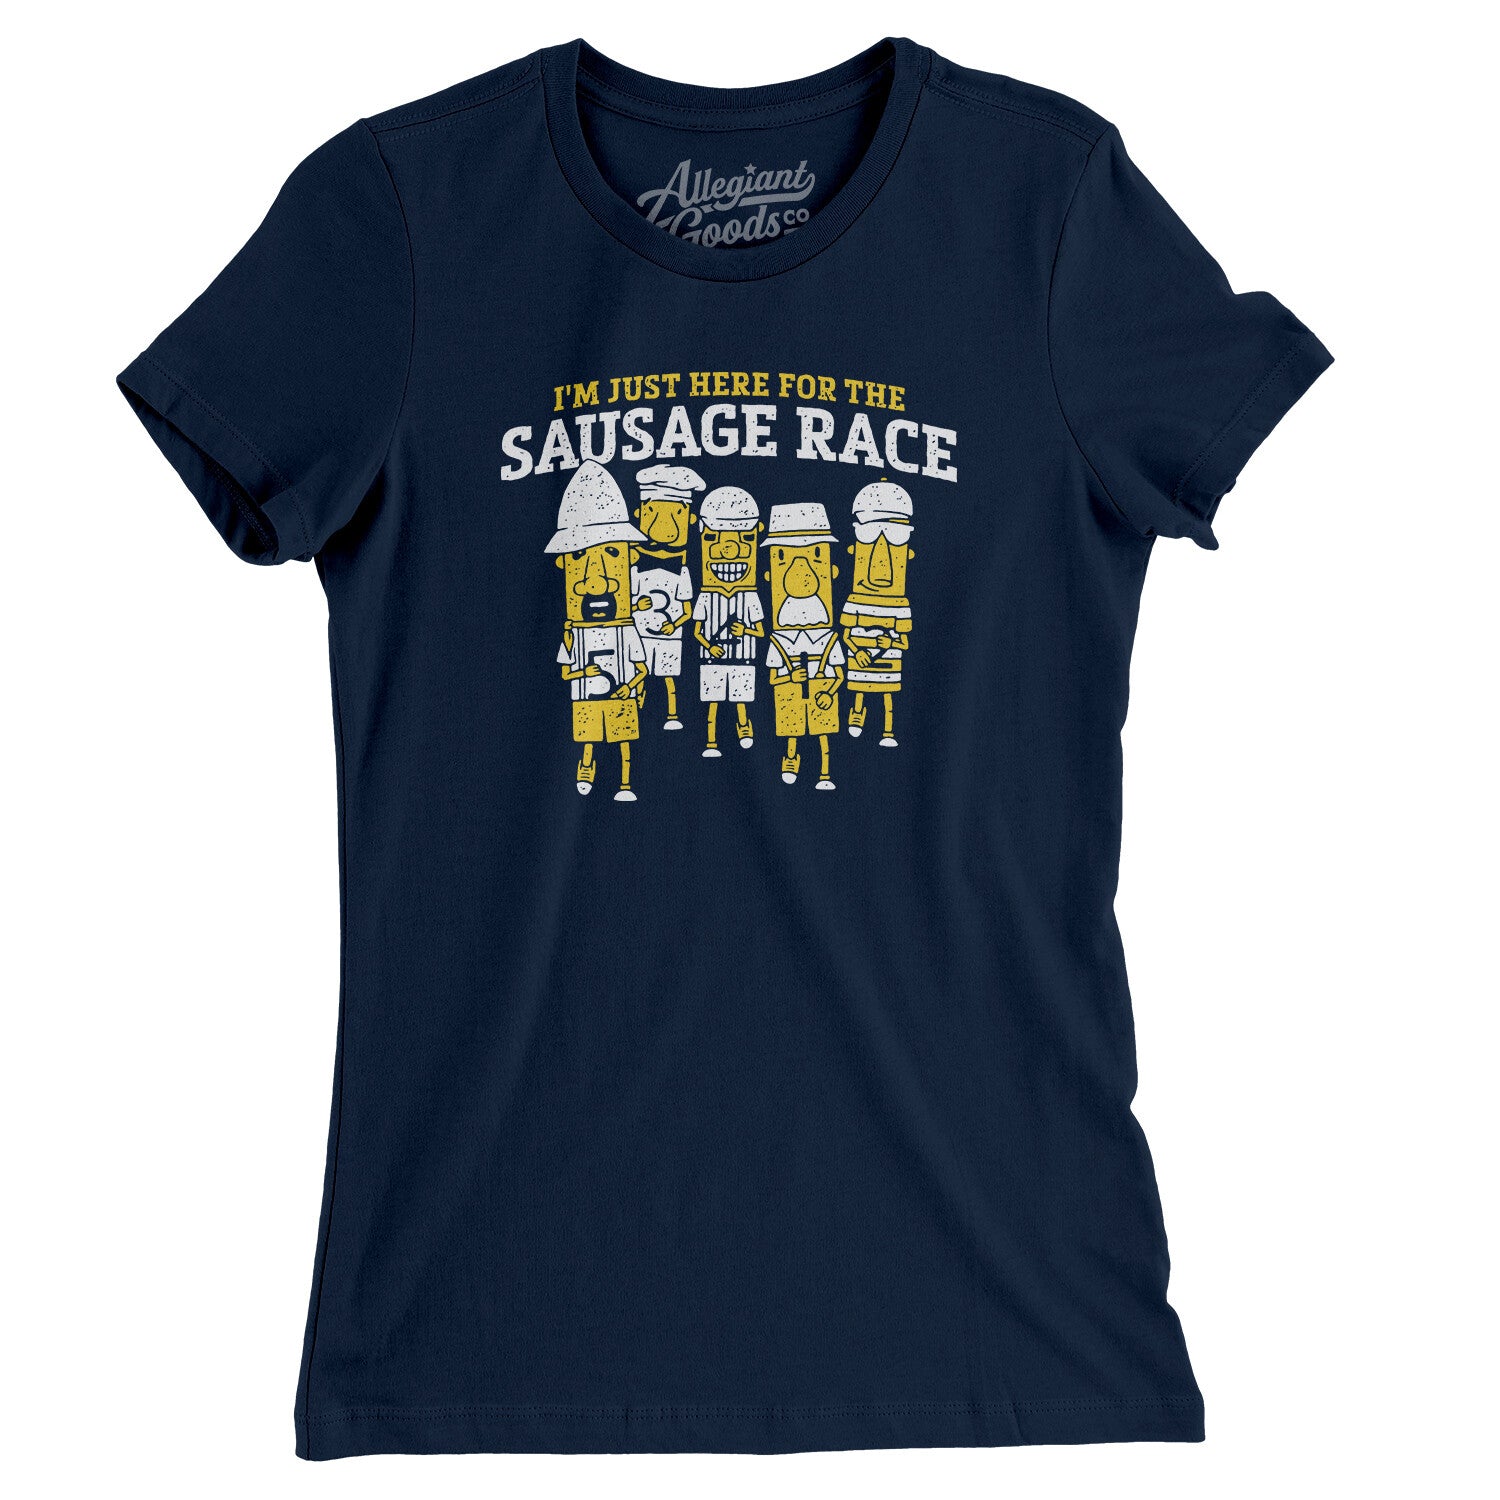 I'm Just Here For The Sausage Race Women's T-Shirt - Allegiant